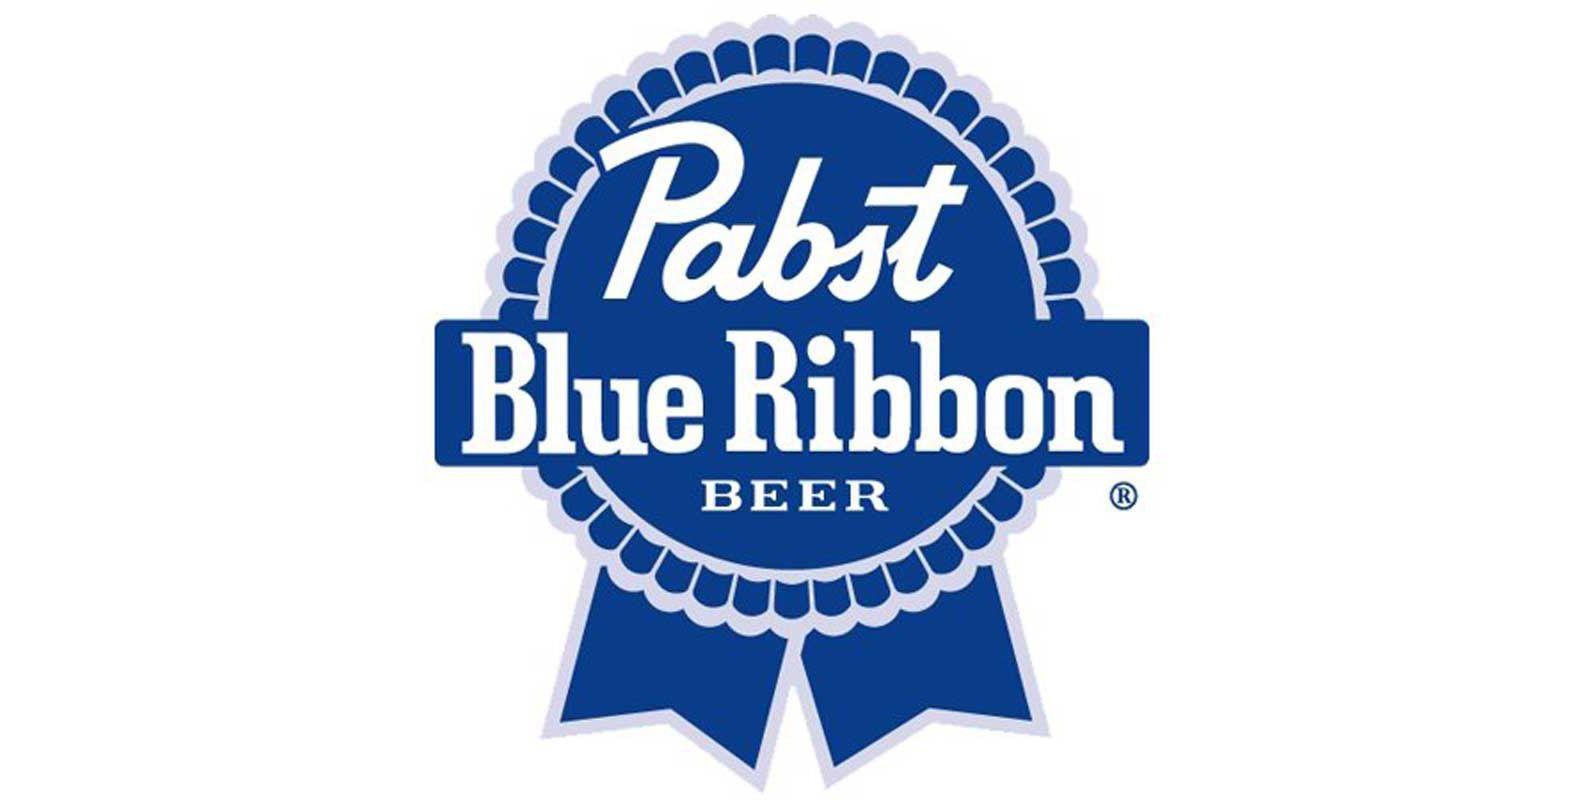 Pabst Logo - Bruhn To Join Pabst As Chief Marketing Officer